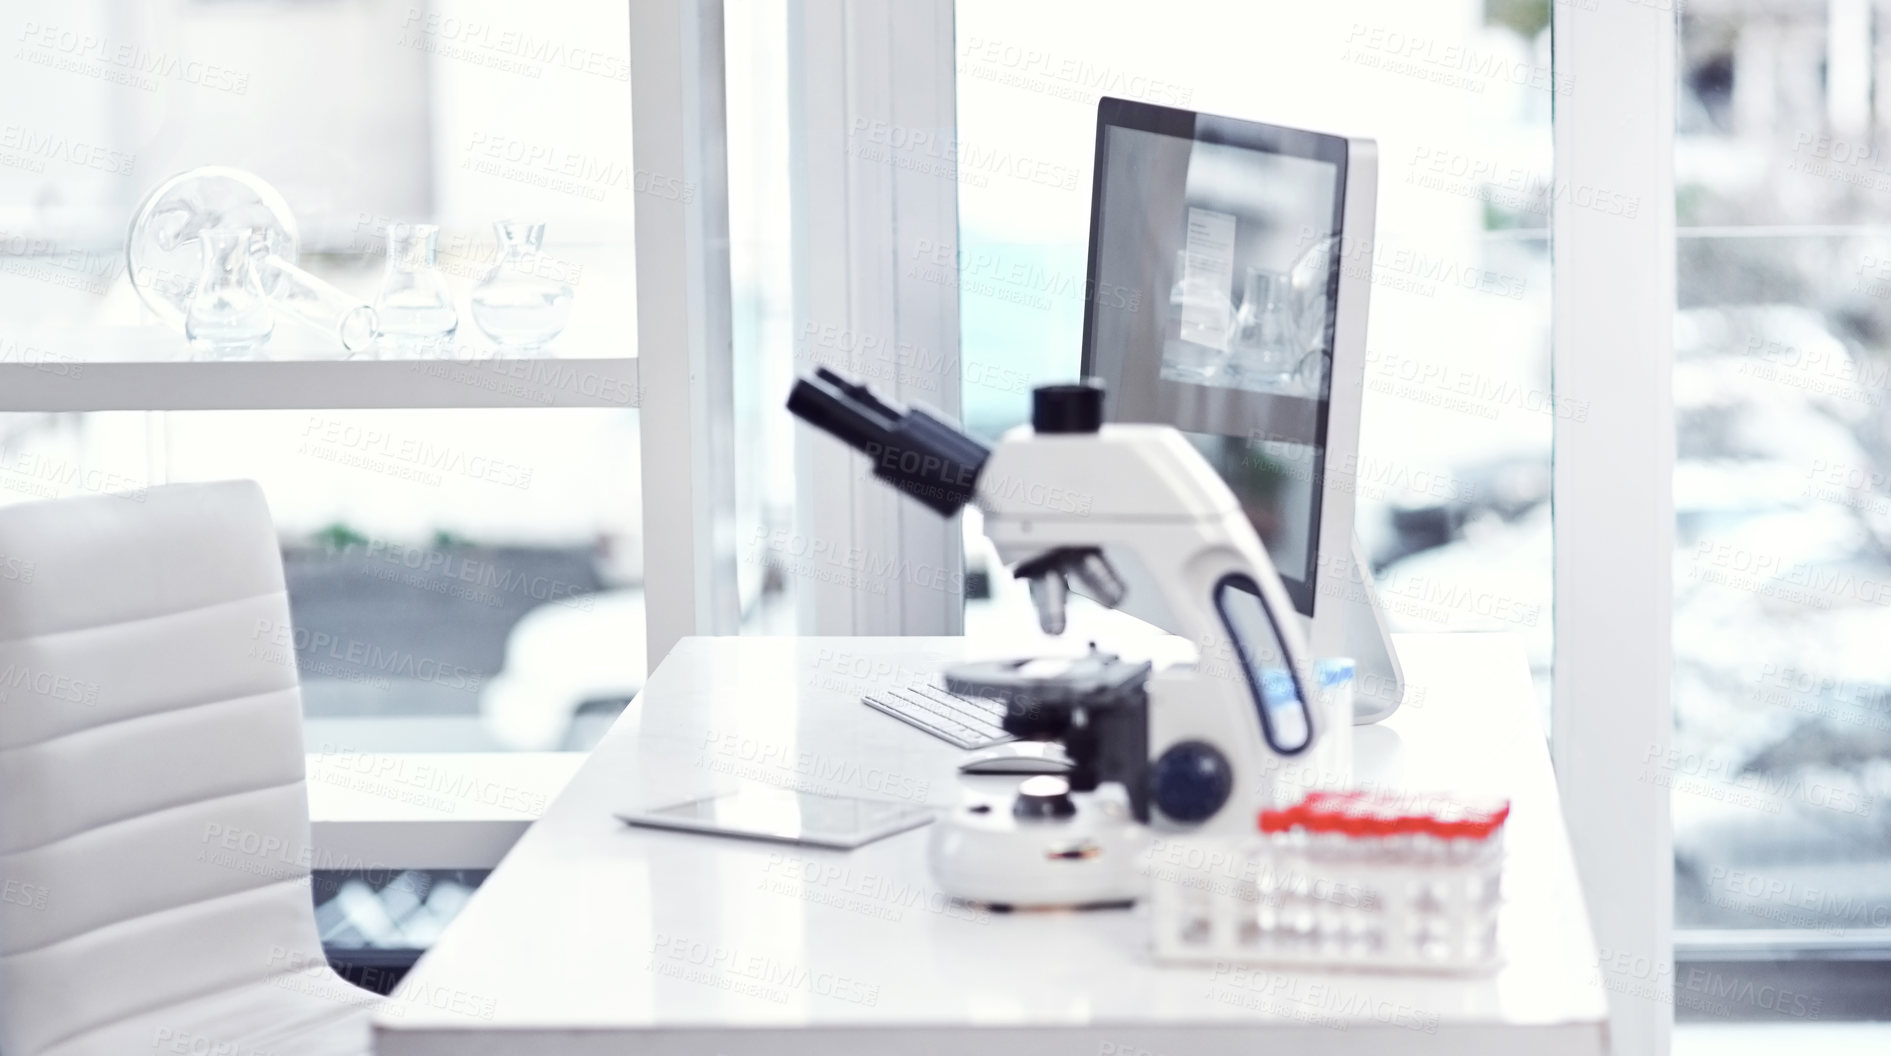 Buy stock photo Shot of a desk with scientific equipment on it inside of a laboratory